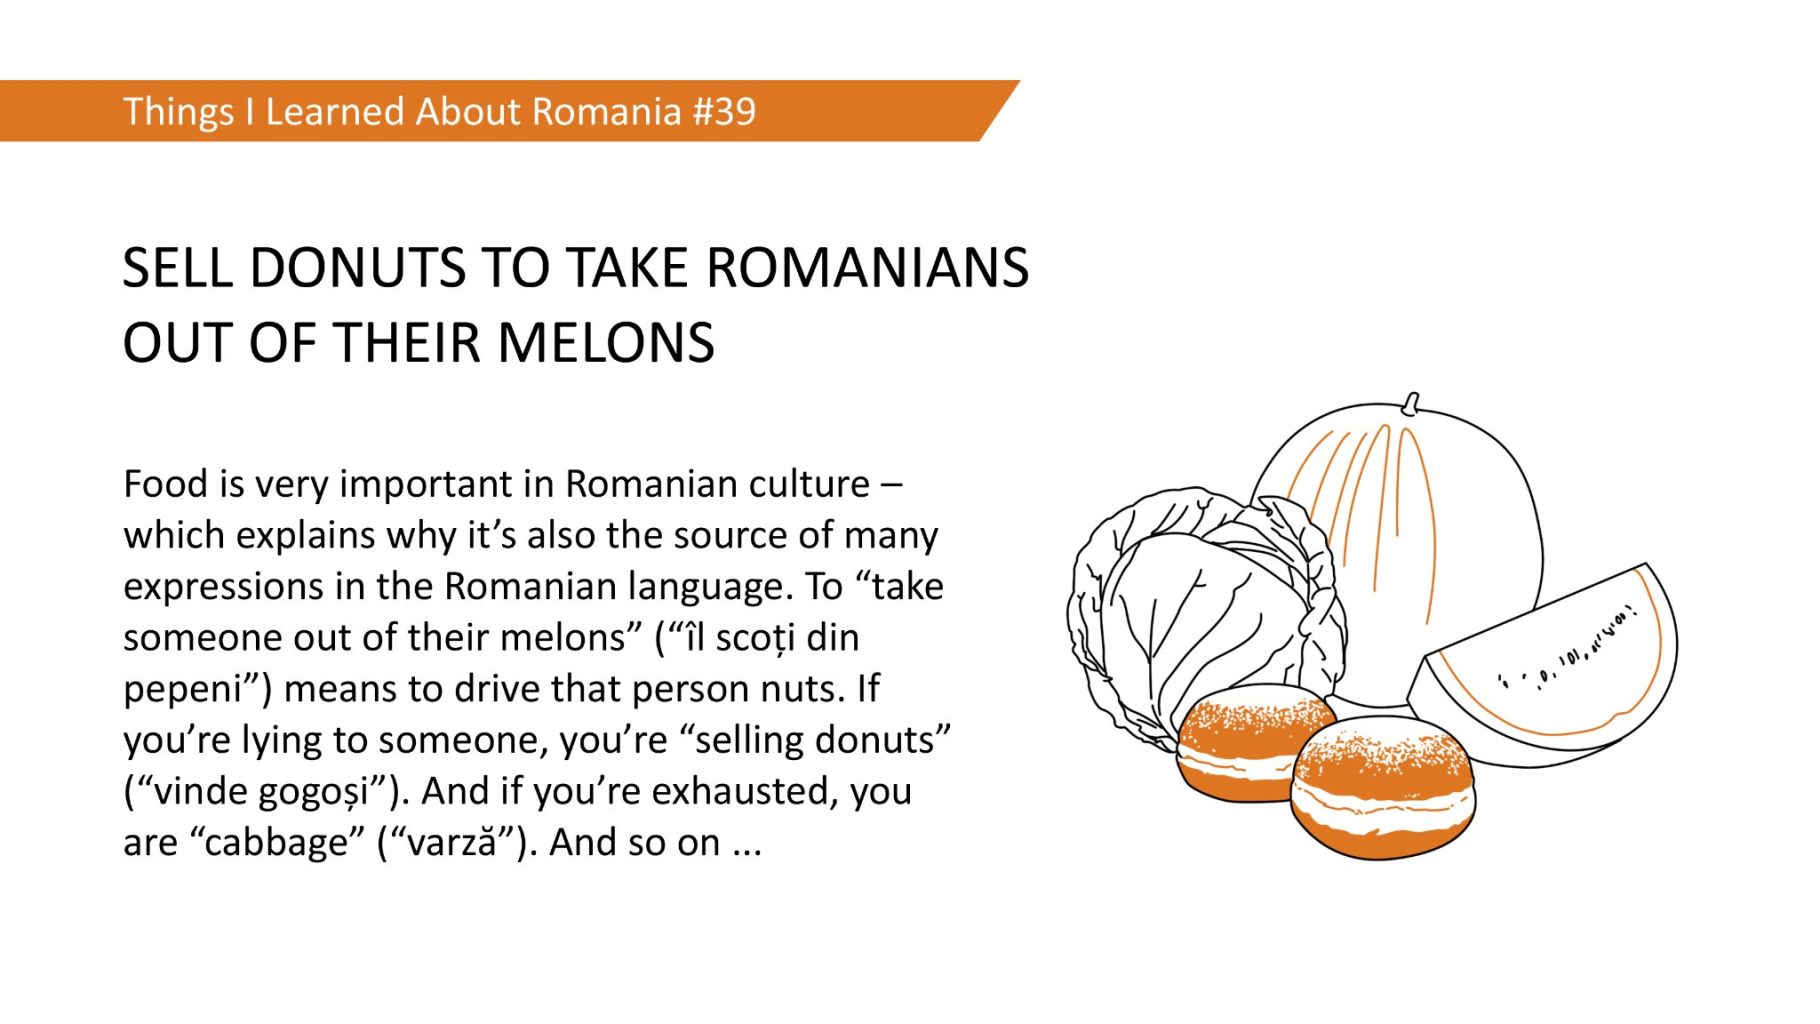 SELL DONUTS TO TAKE ROMANIANS OUT OF THEIR MELONS - Food is very important in Romanian culture which explains why it's also the source of many expressions in the Romanian language. To "take someone out of their melons" ("1l scoti din pepeni") means to drive that person nuts. If you're lying to someone, you're "selling donuts" ("vinde gogosi"). And if you're exhausted, you are "cabbage" ("varzä"). And so on ...